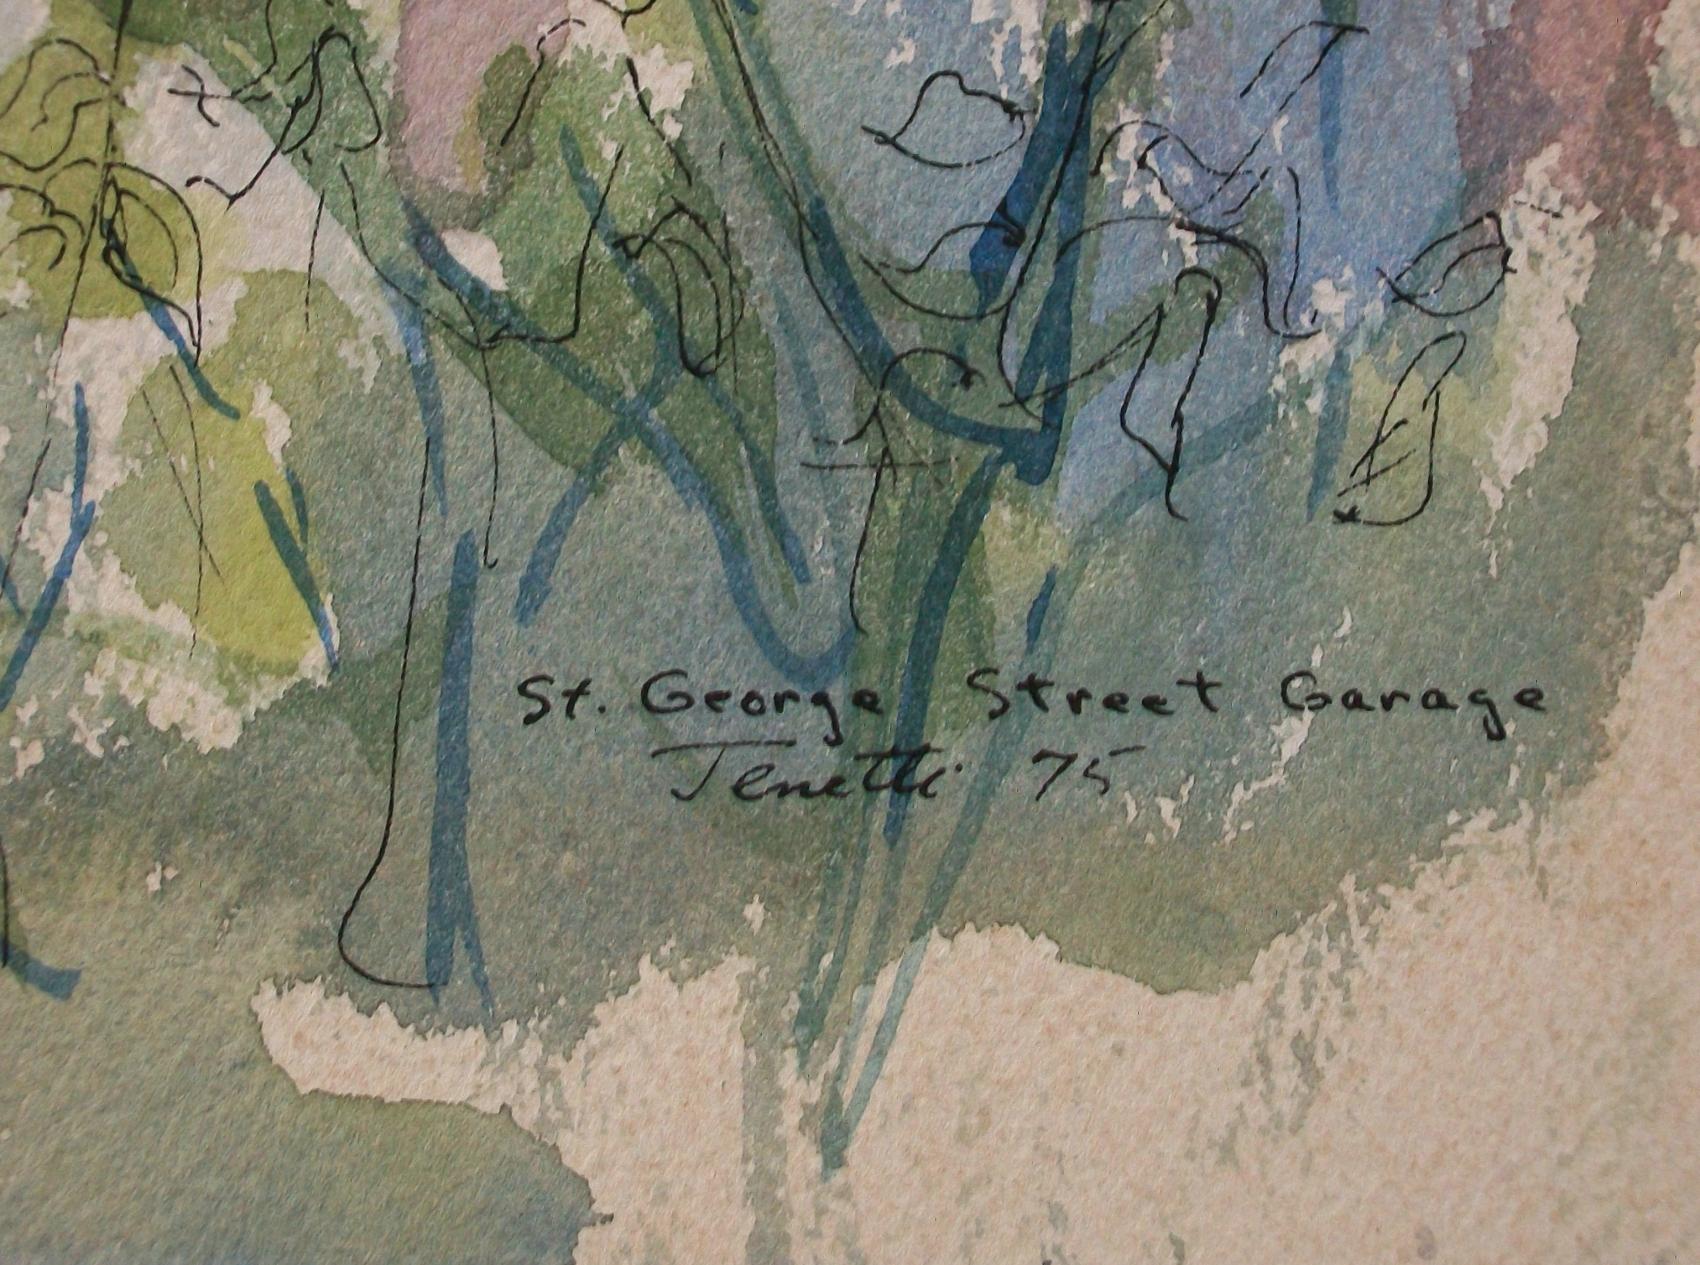 Hand-Painted Linda Jenetti, 'St. George St. Garage', Watercolor on Paper, Canada, C. 1975 For Sale